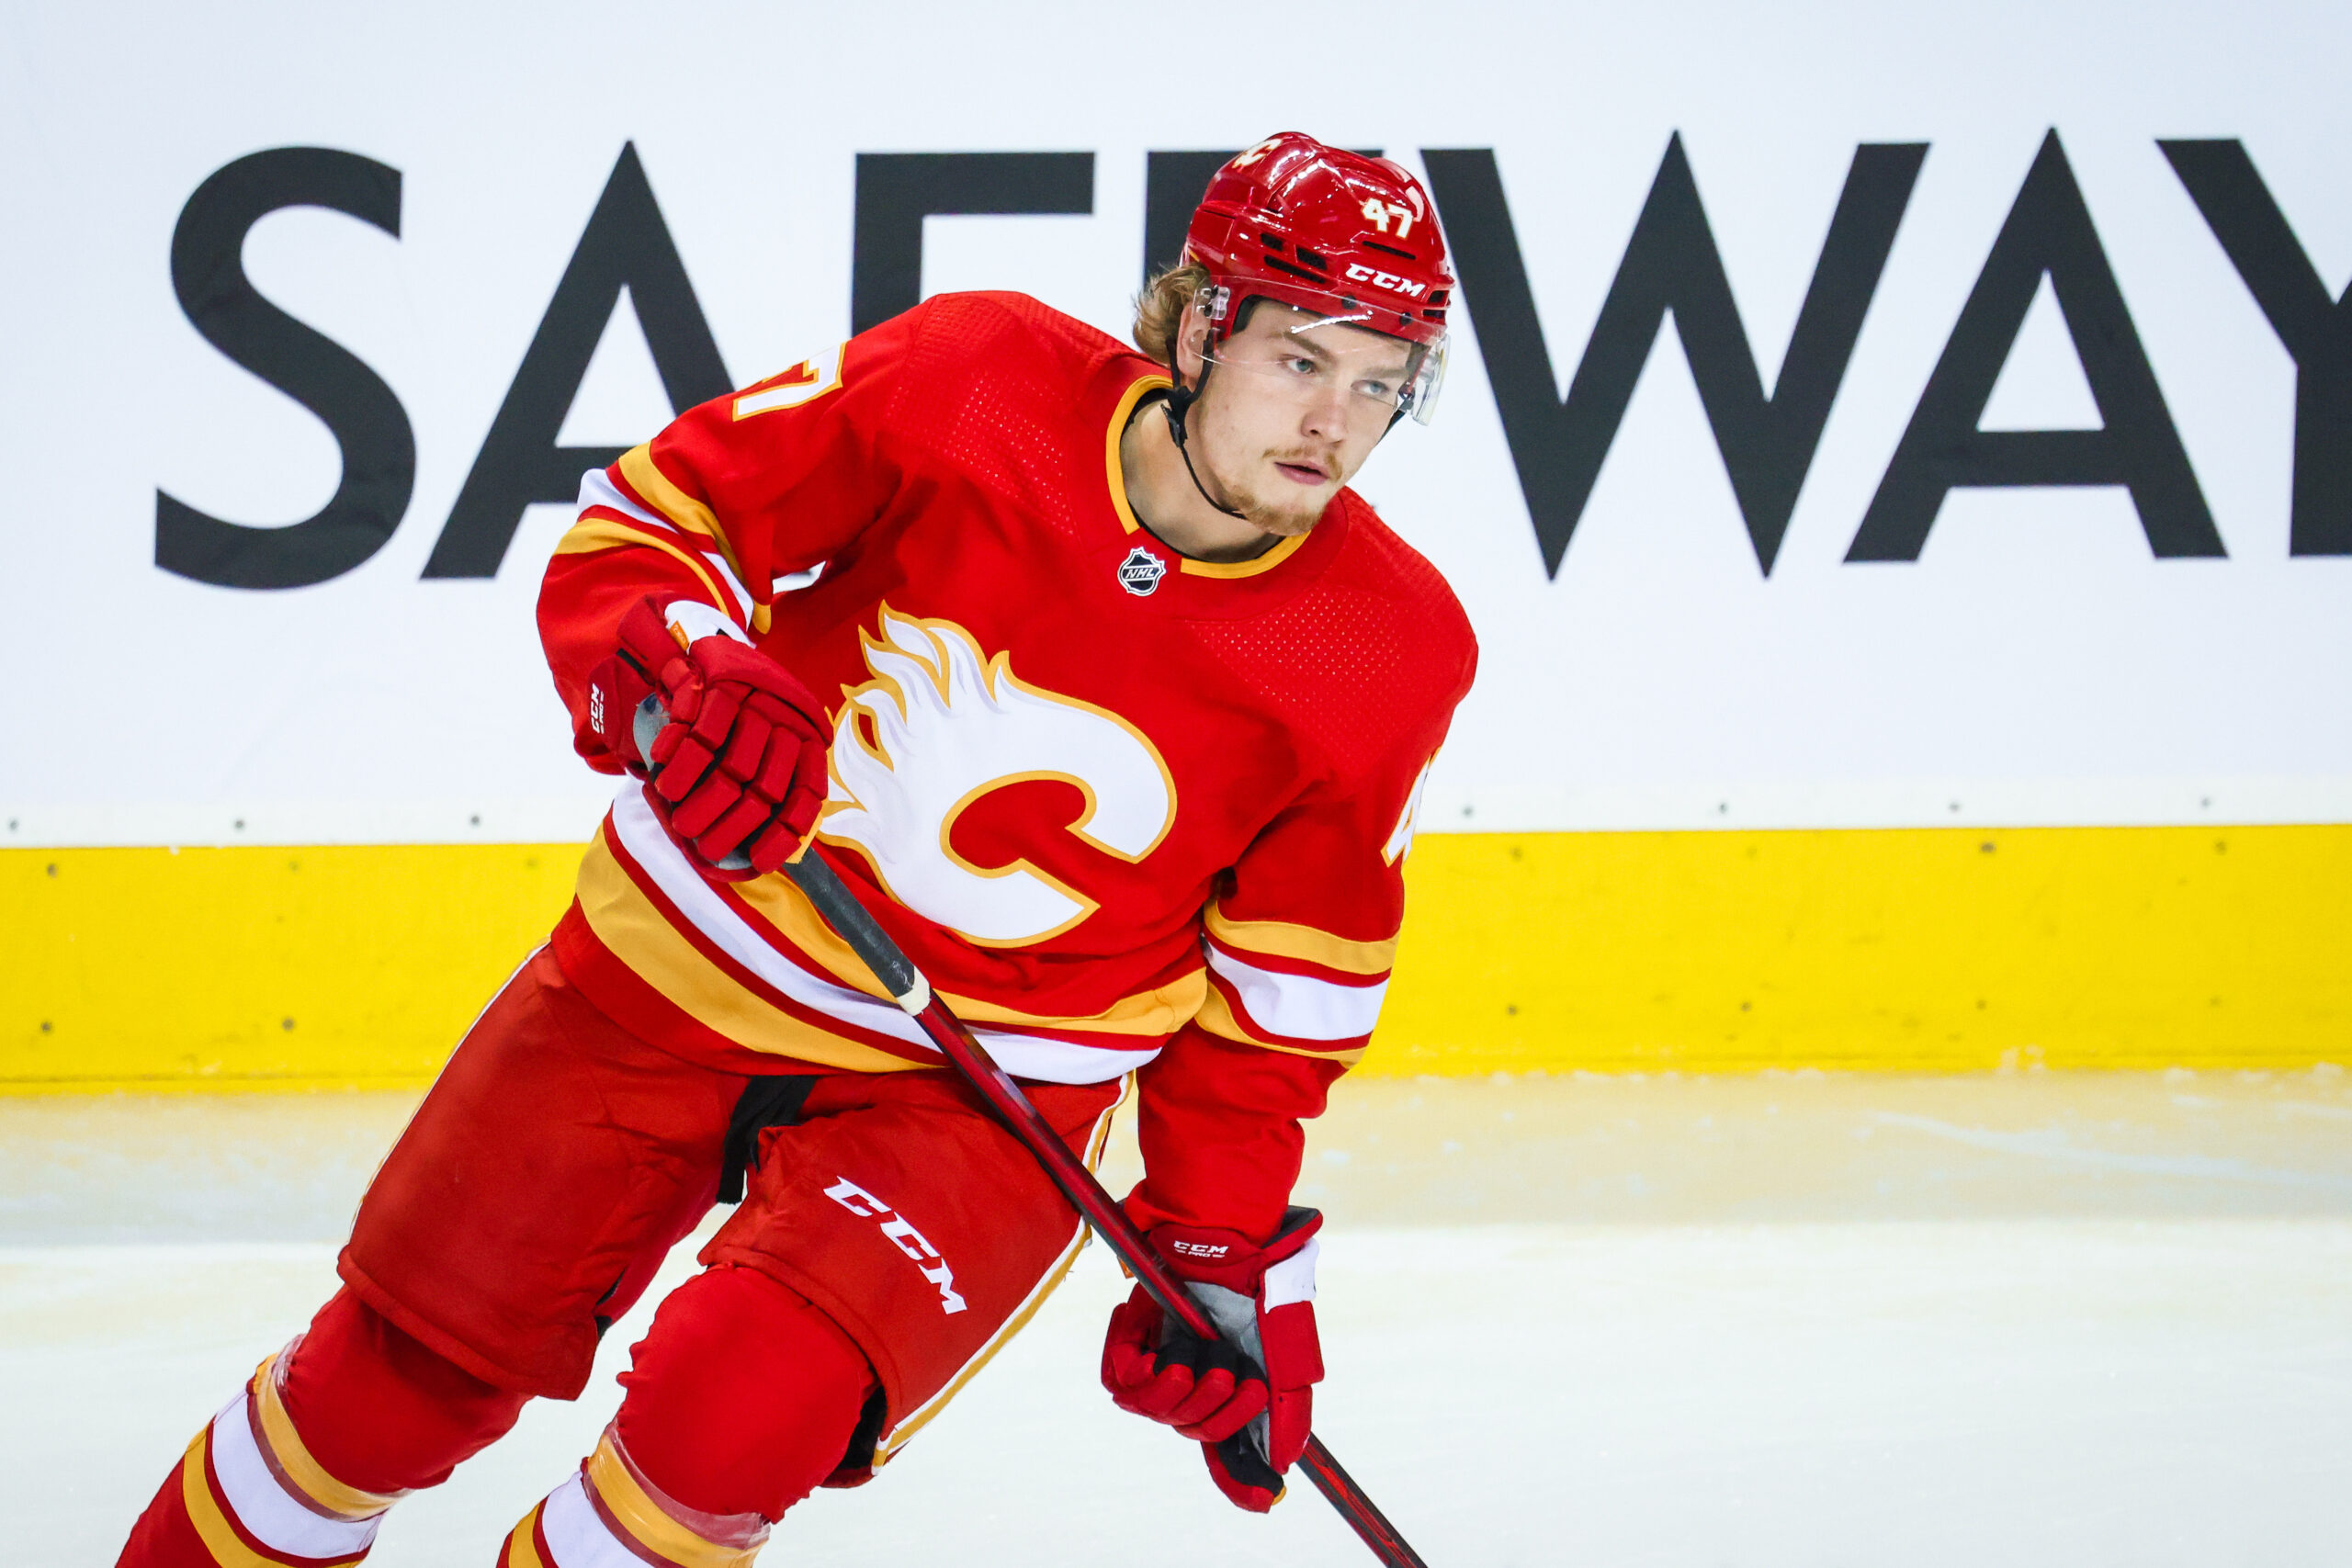 Analytics site gives Flames best chance to be 2023 Stanley Cup champs